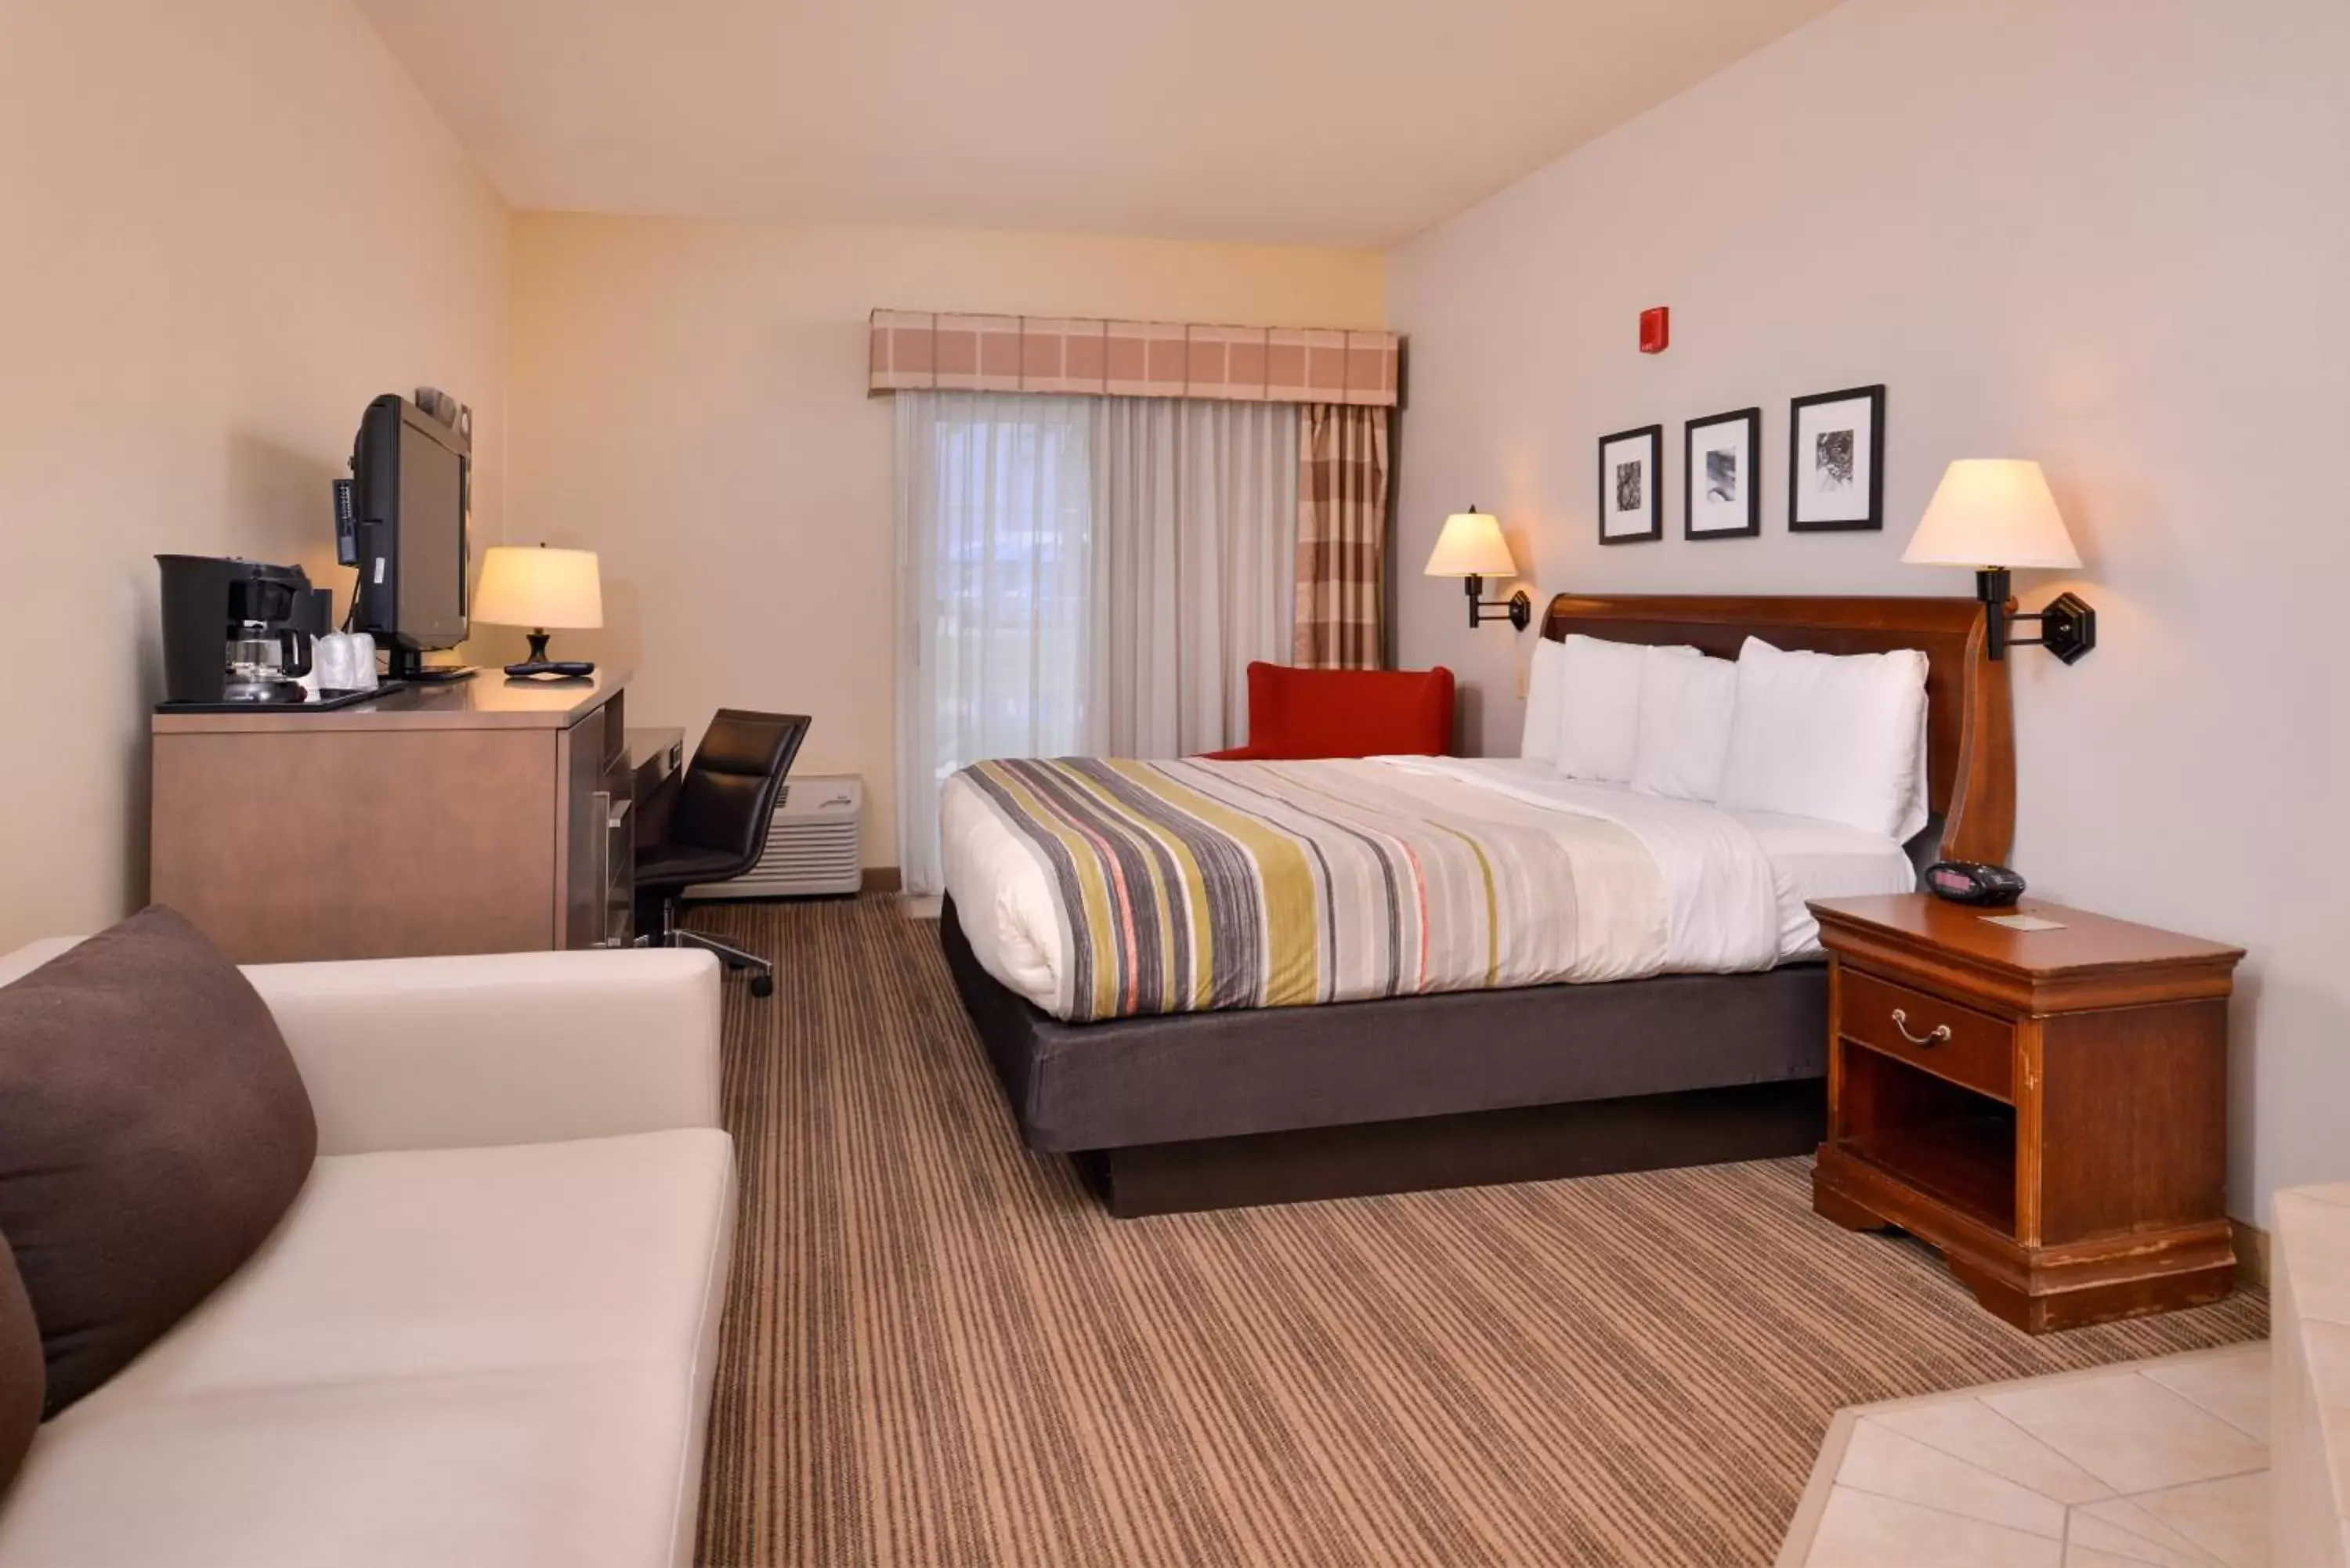 Property building in Country Inn & Suites by Radisson, Omaha Airport, IA